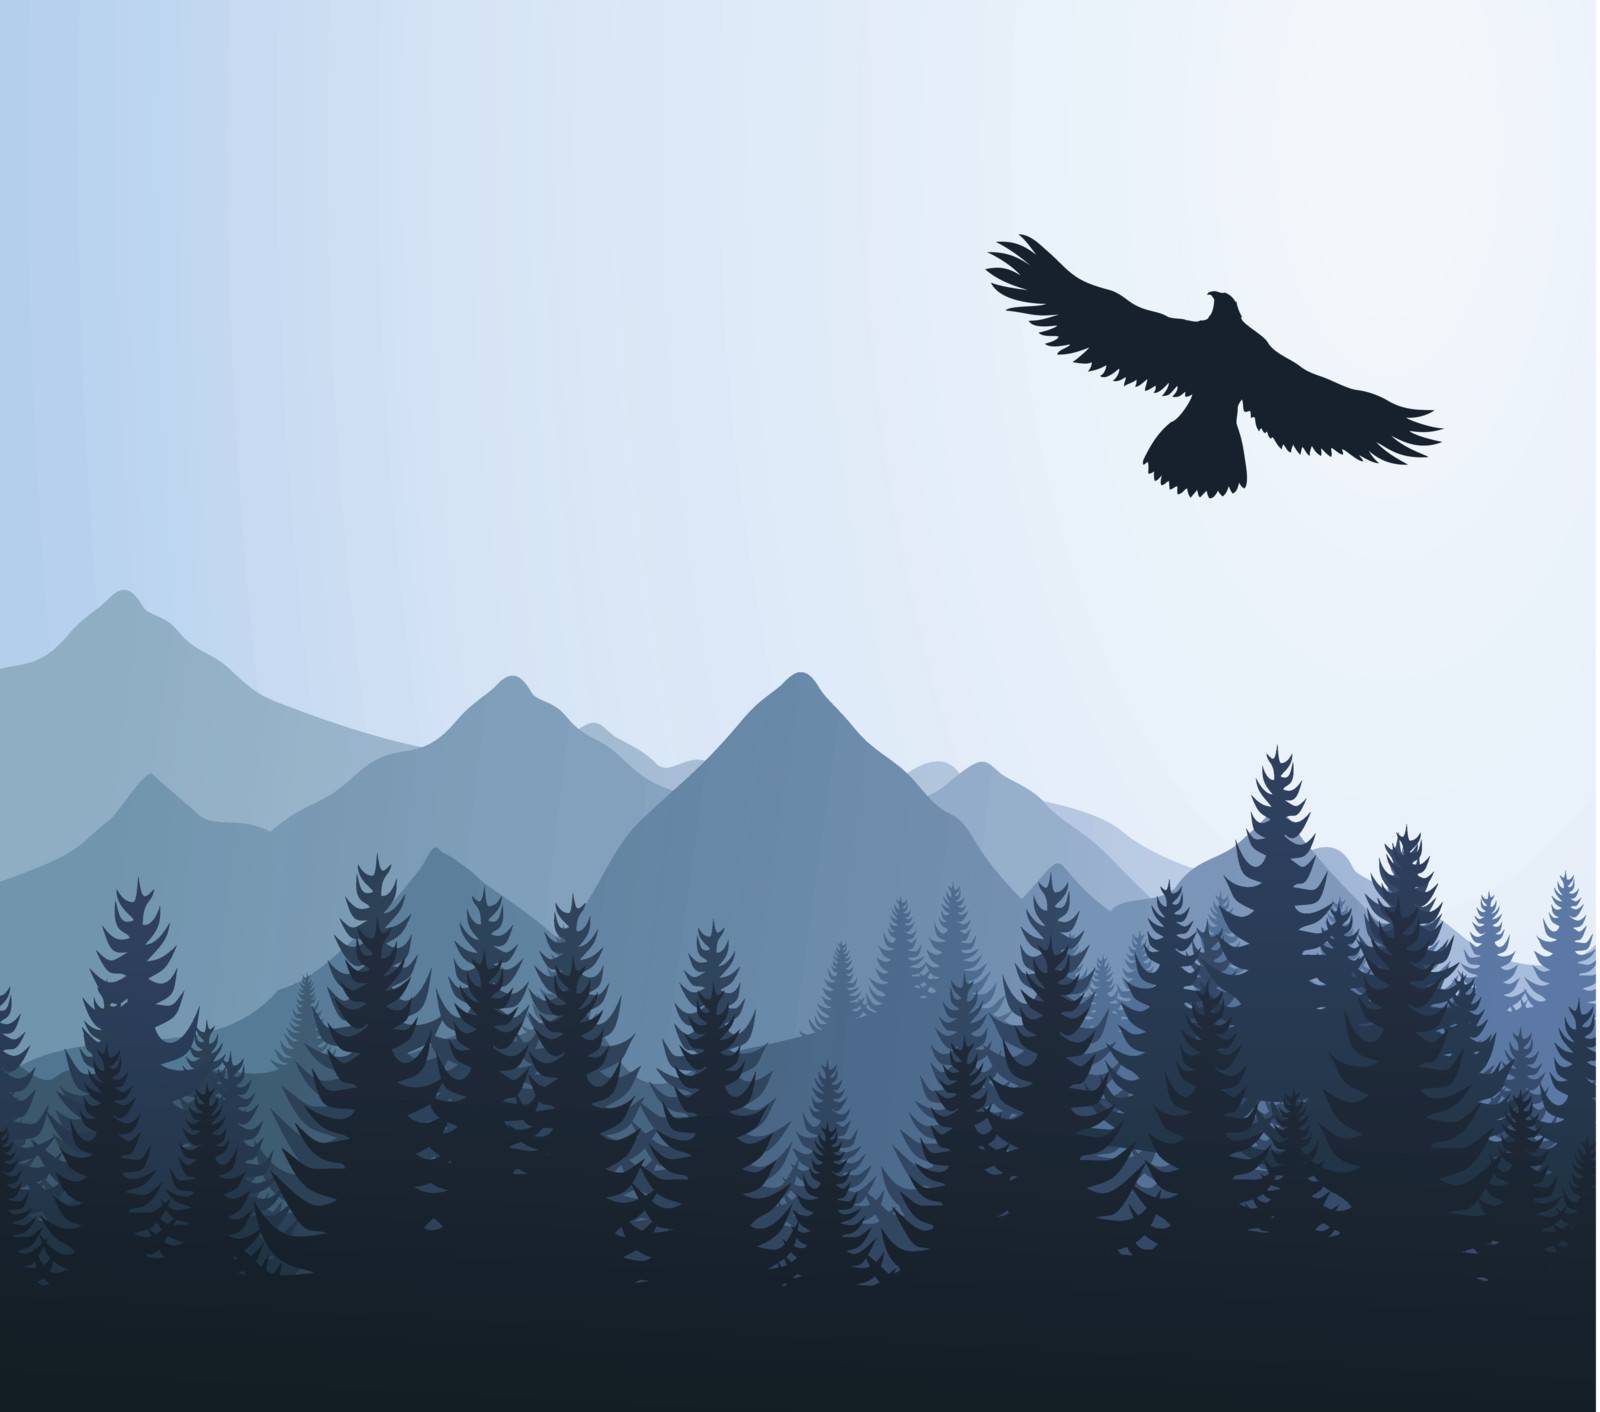 Eagle over woods and mountains. A vector illustration